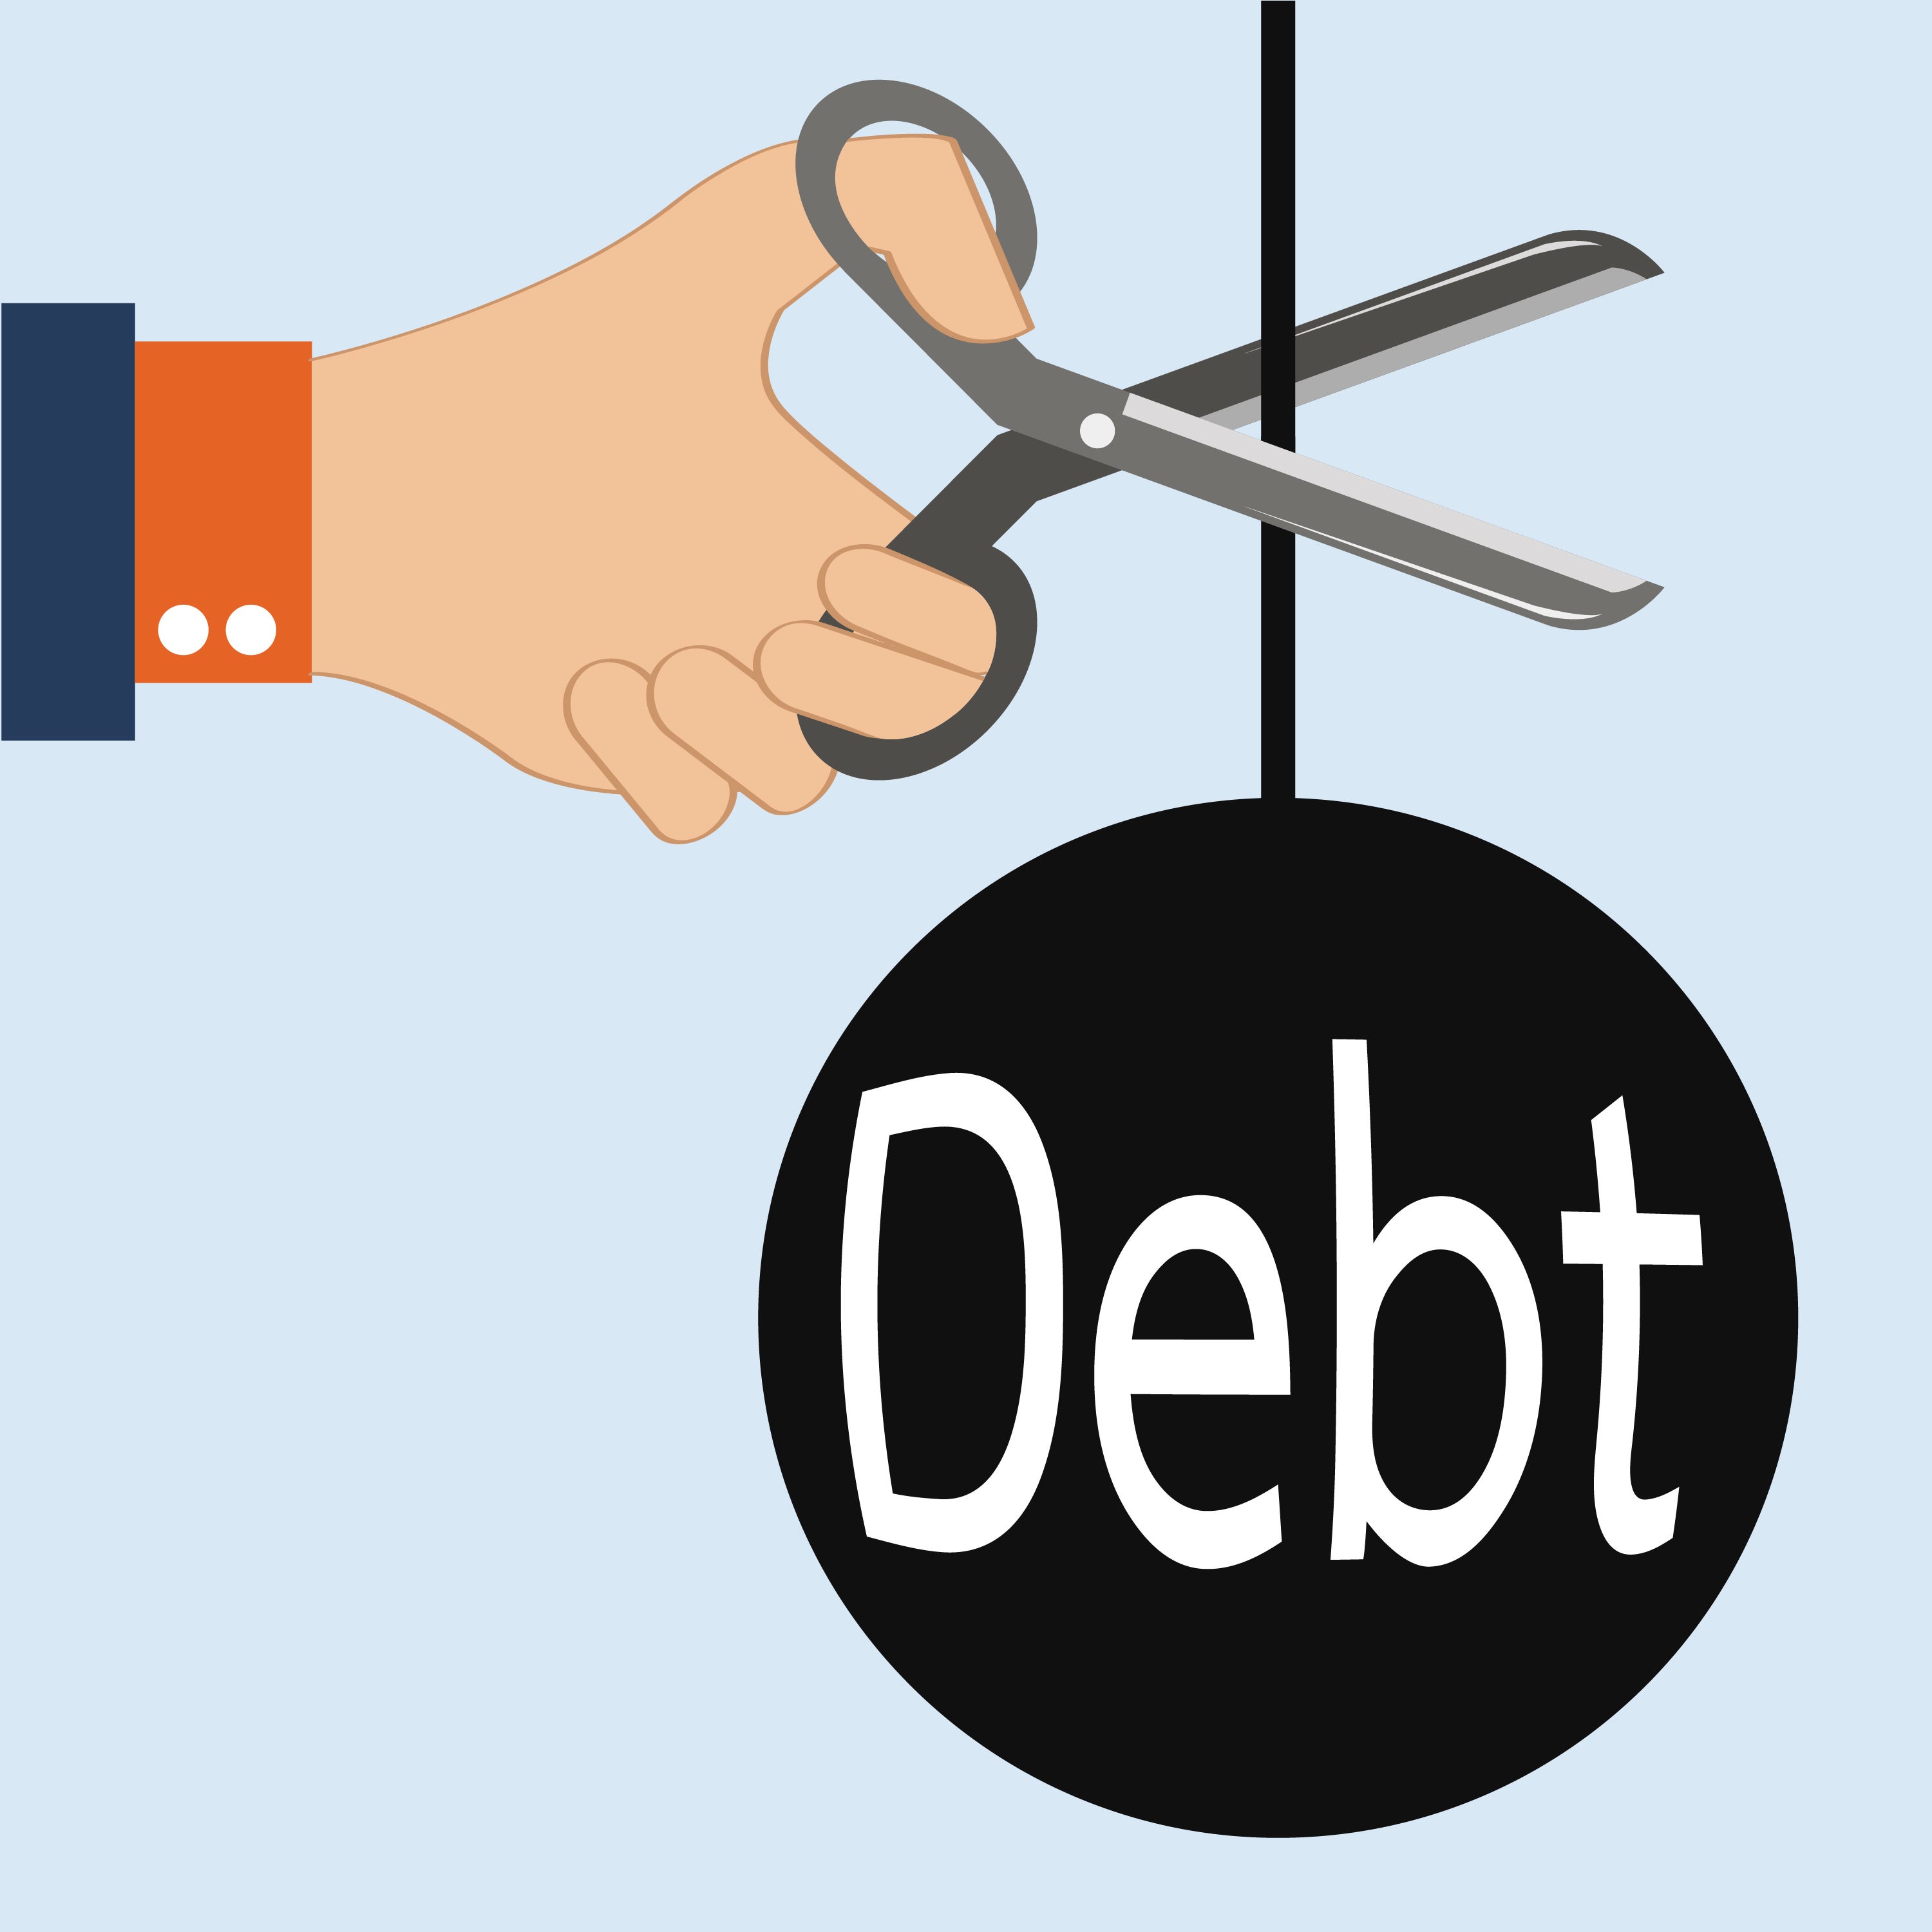 paying debt doesn't mean credit improves - creditrepair